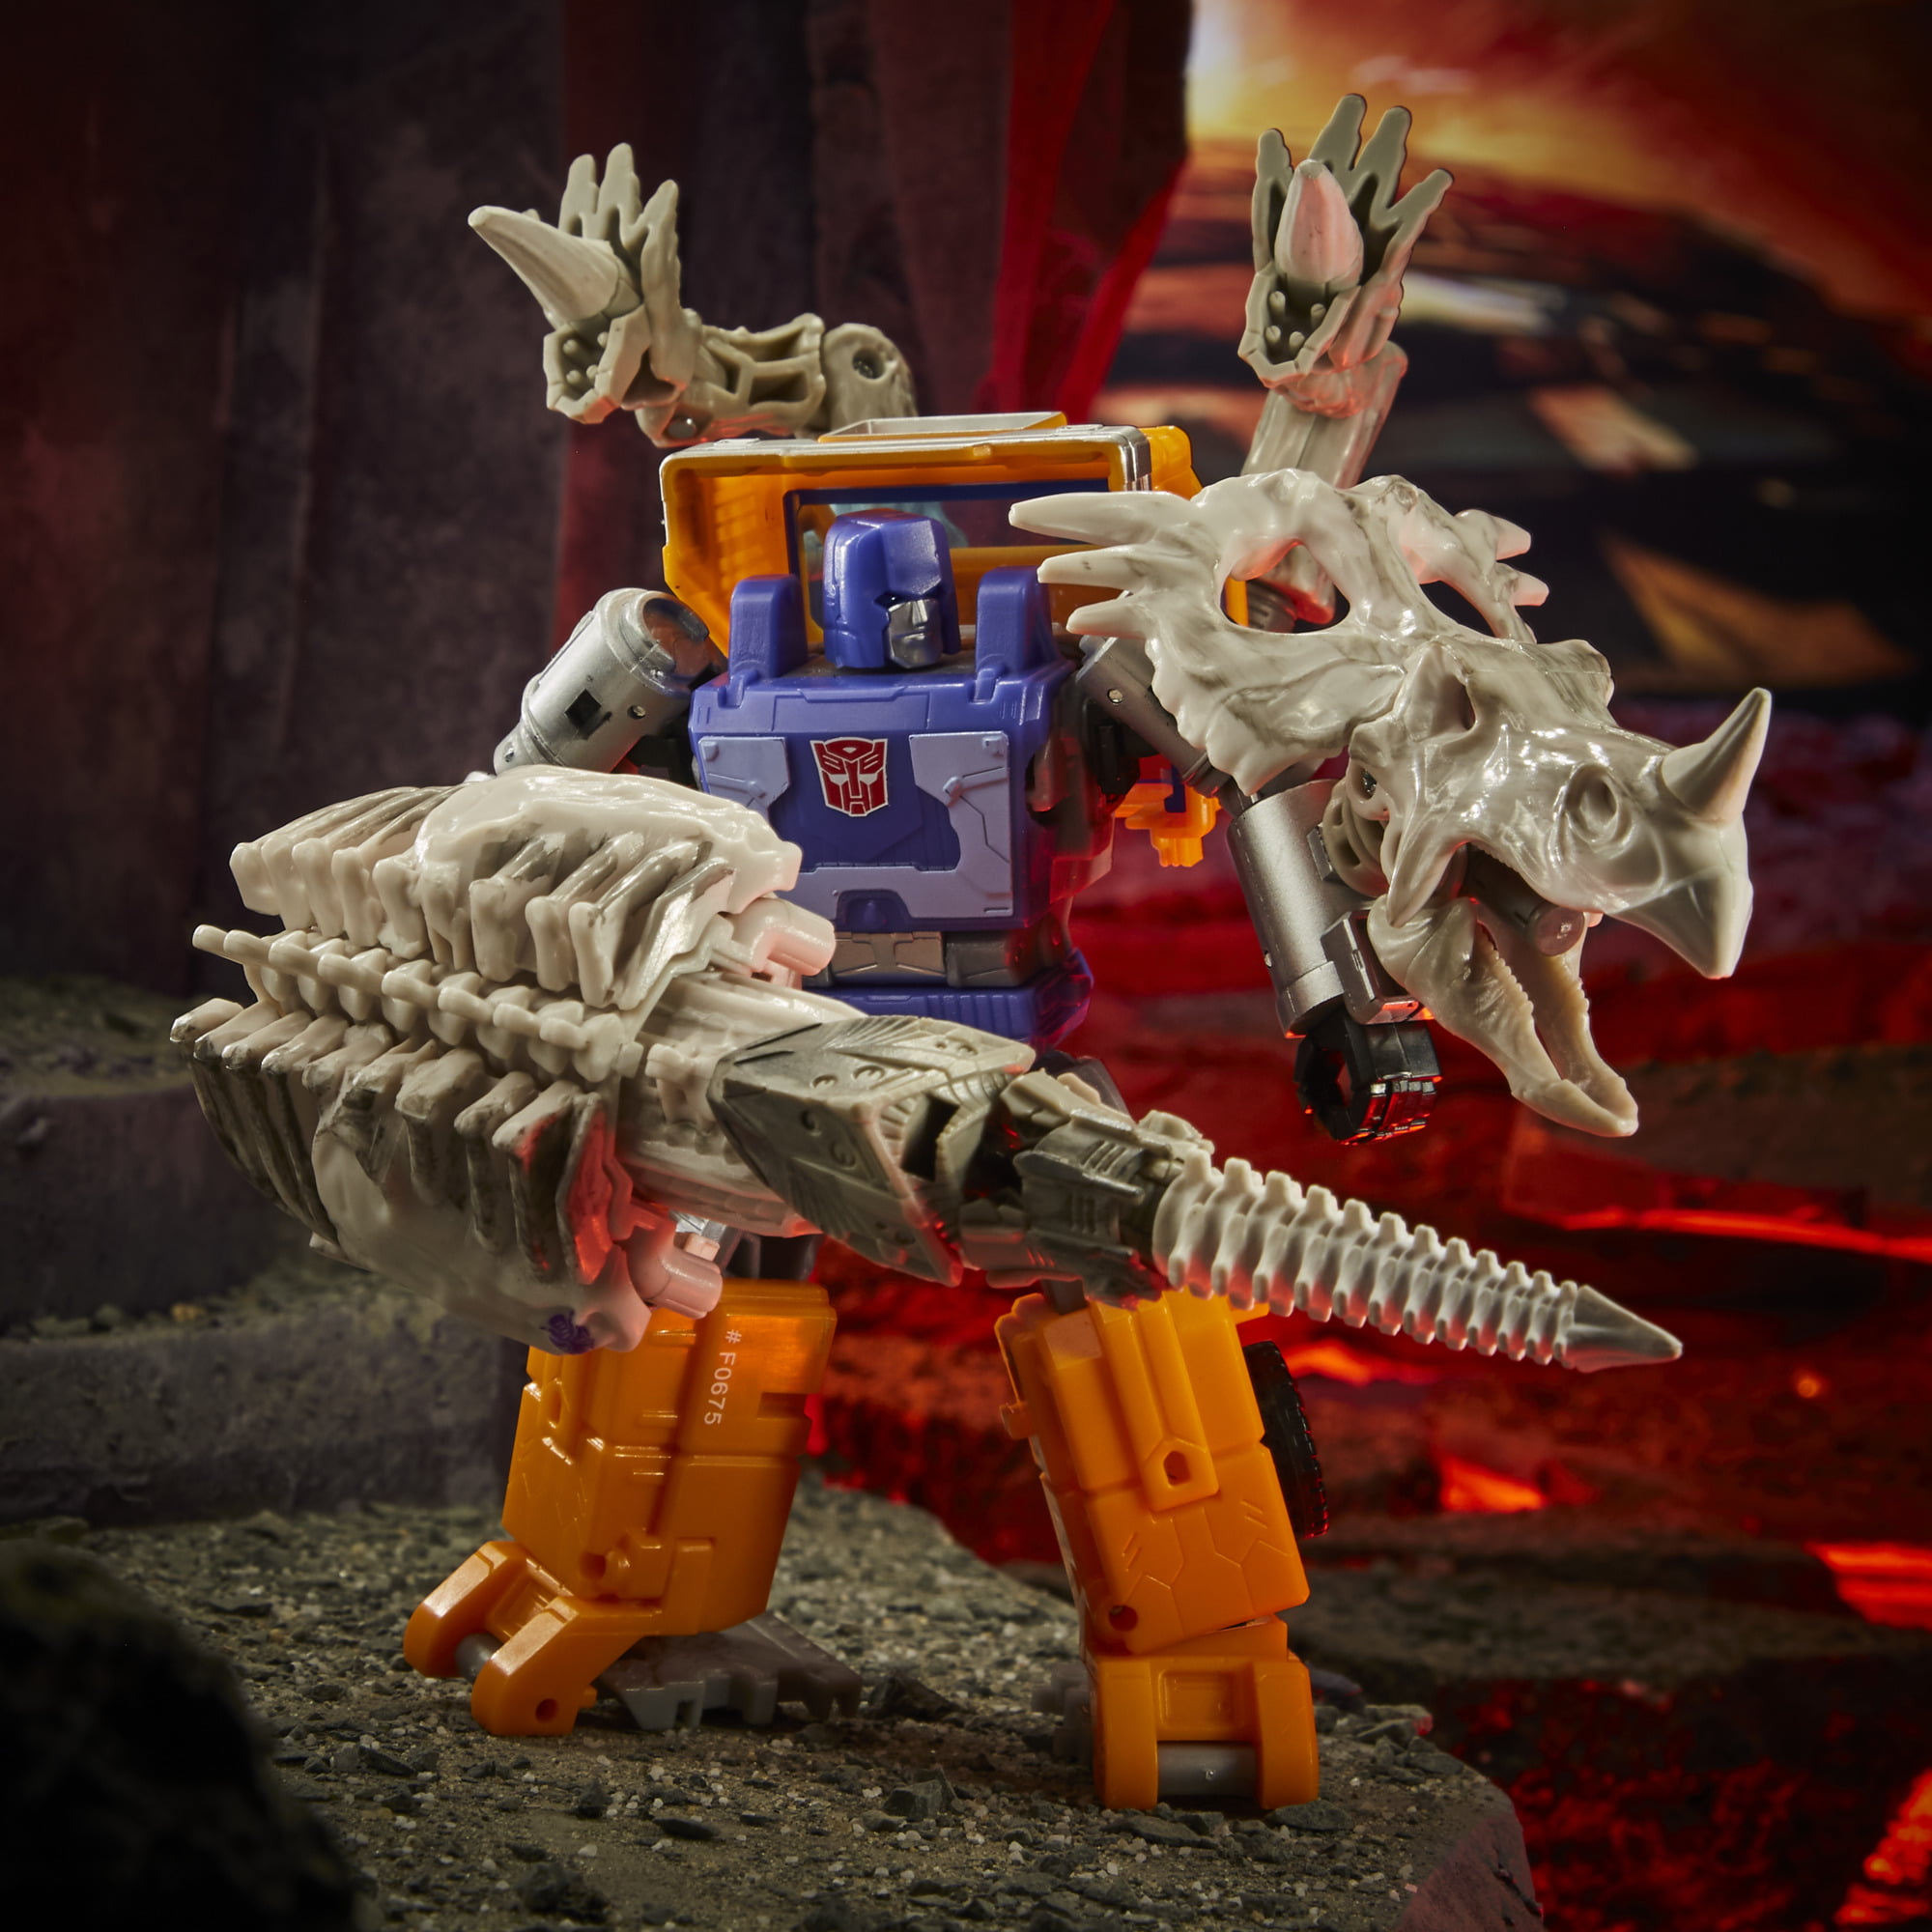 Transformers Generations WFC Kingdom Deluxe Ractonite Fossilizer May.1,2021